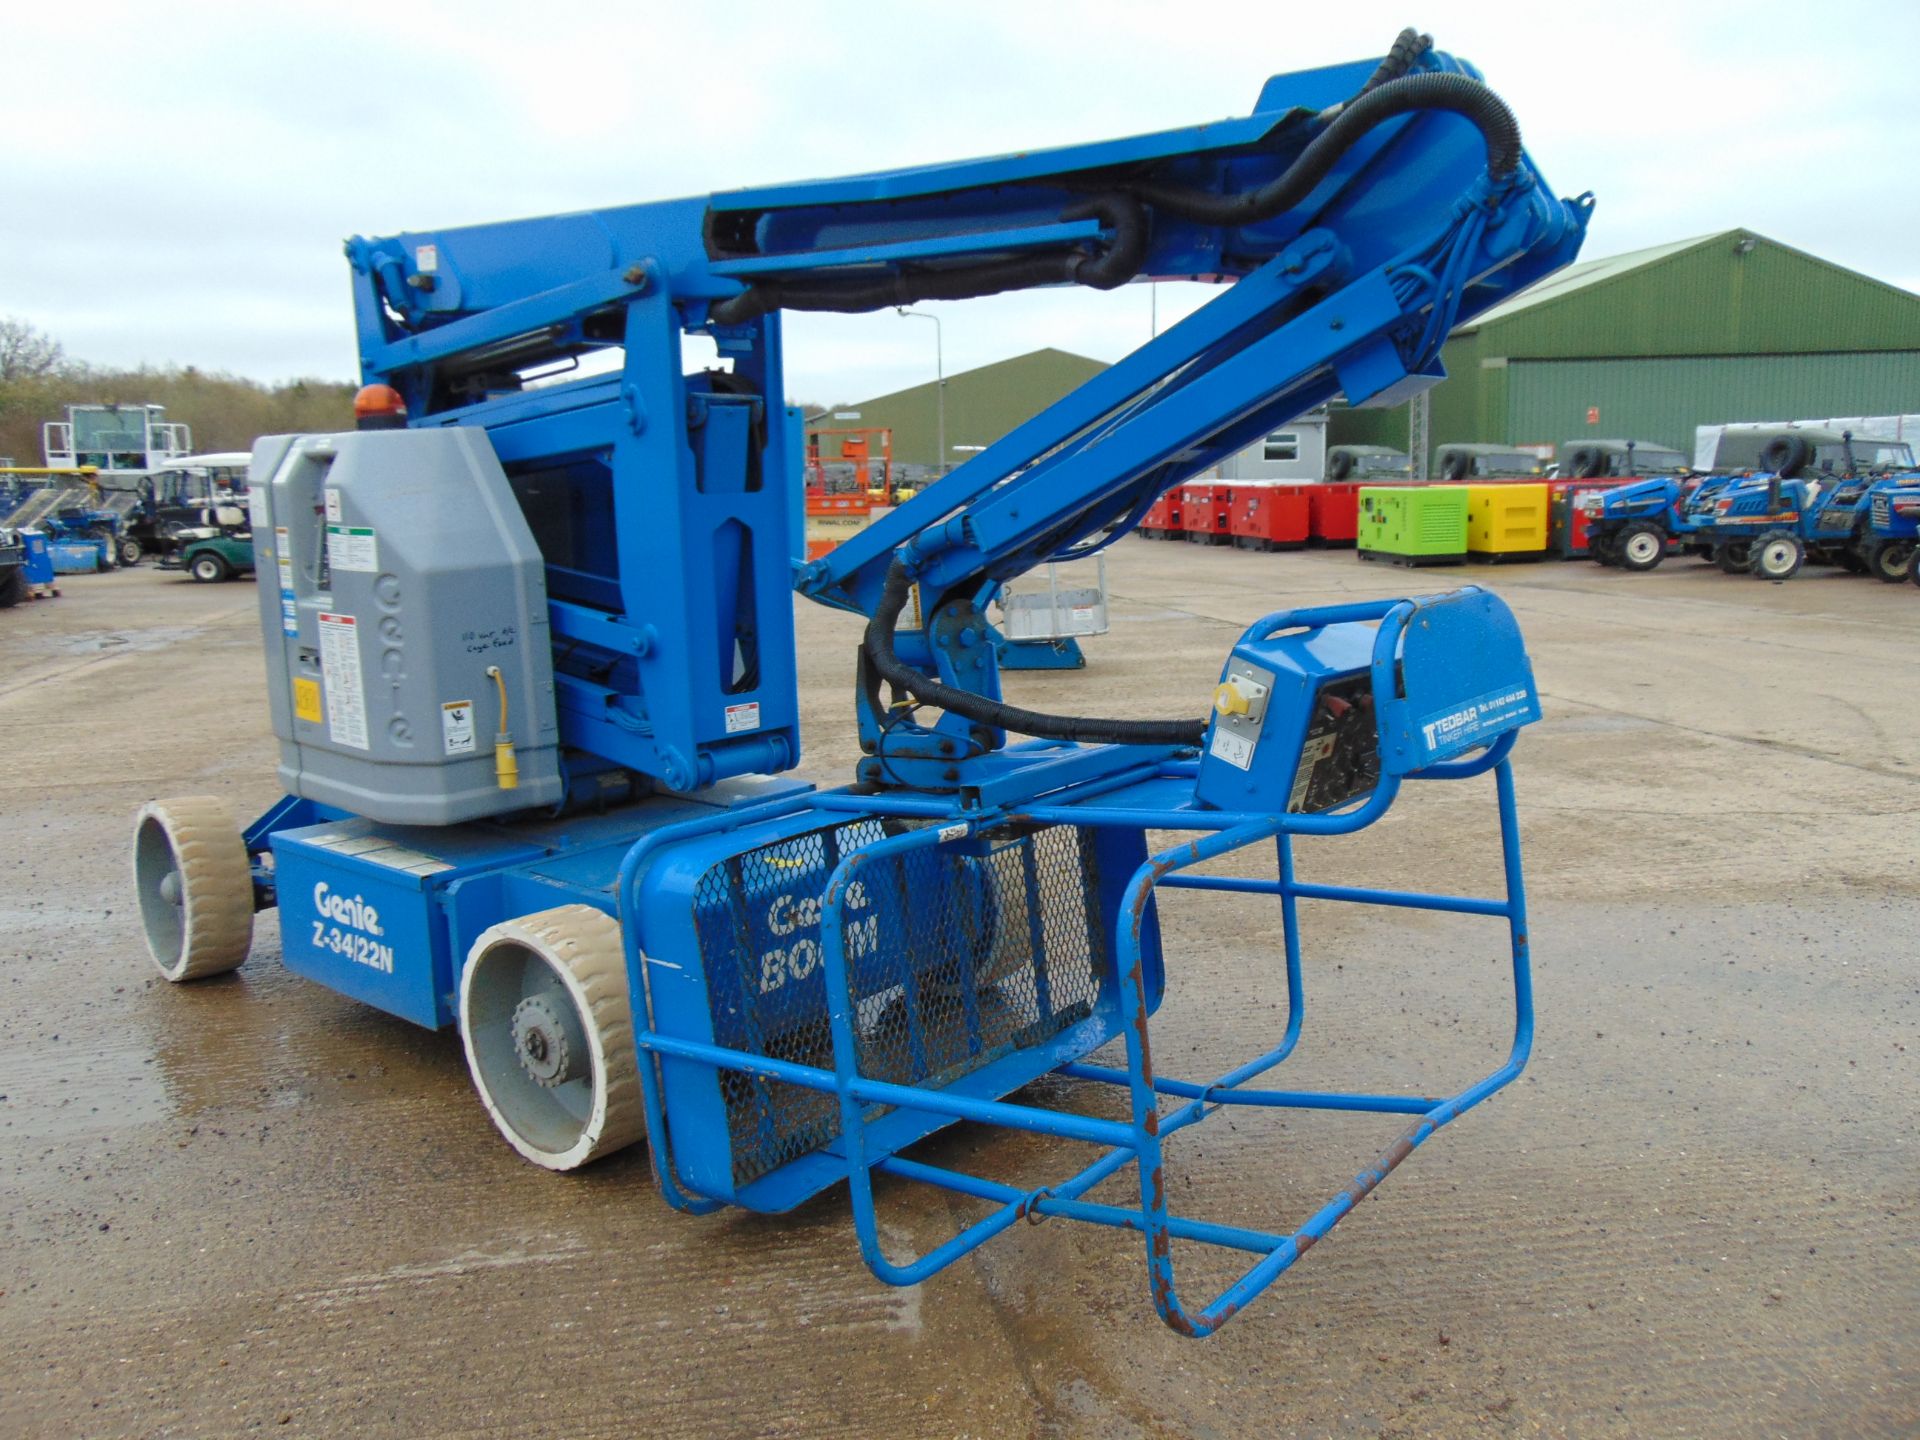 Genie Z-34/22N Articulated Electric Boom Lift ONLY 724 HOURS! - Image 3 of 18